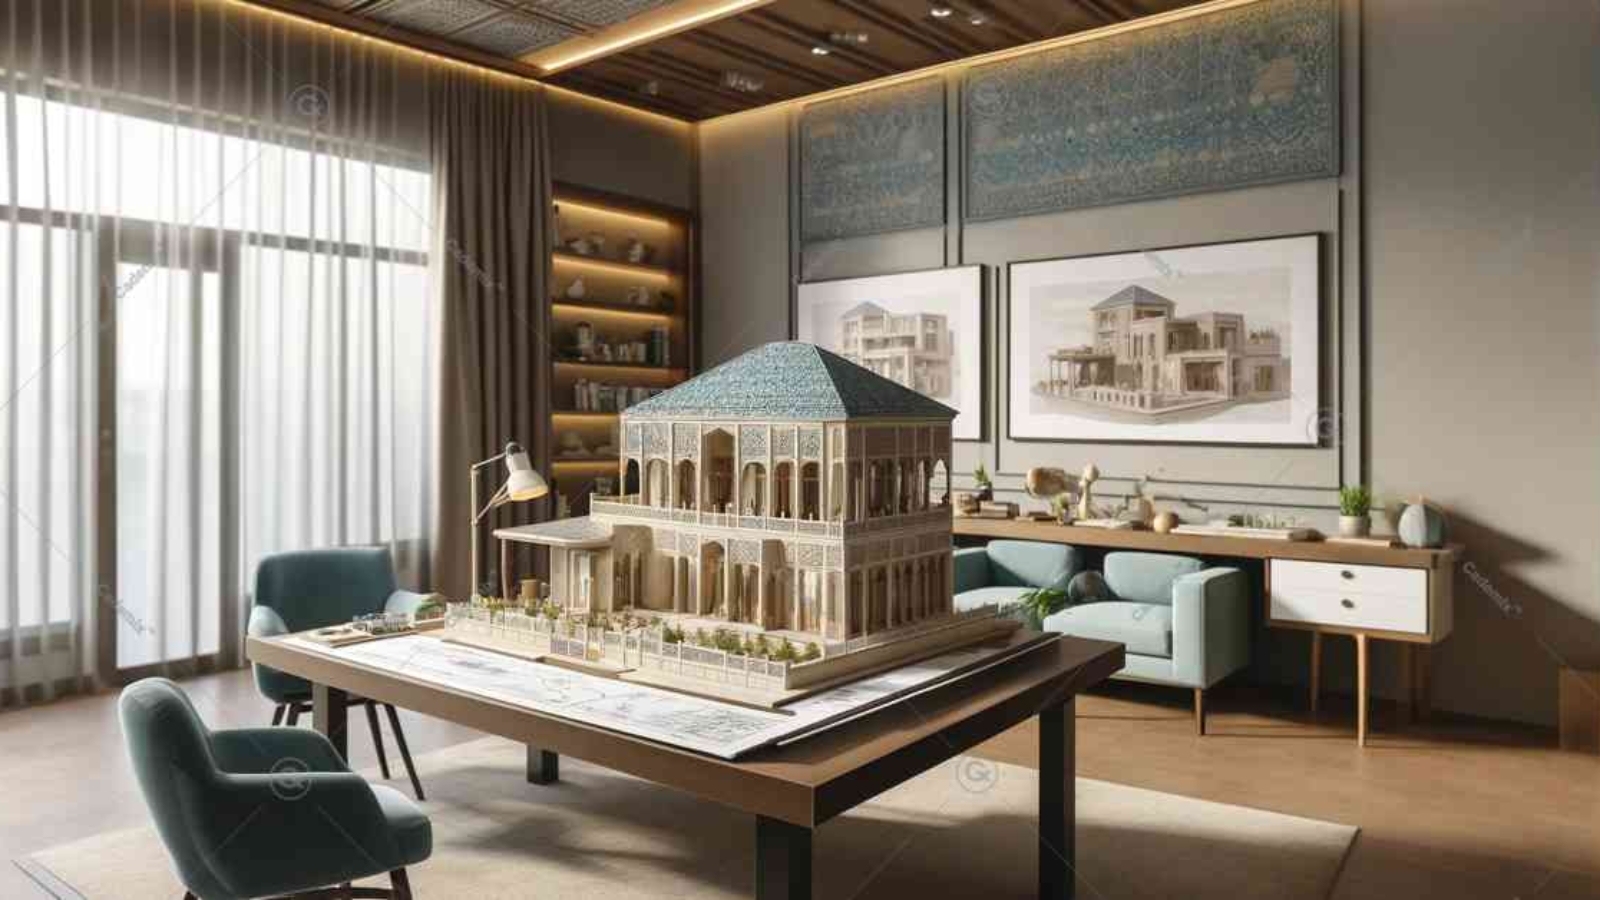 This image showing a professional interior design studio with a detailed model of a traditional Iranian house on a large table. The studio features moderate color accents in soft blue and green, enhancing the sophisticated atmosphere suitable for architectural presentations.